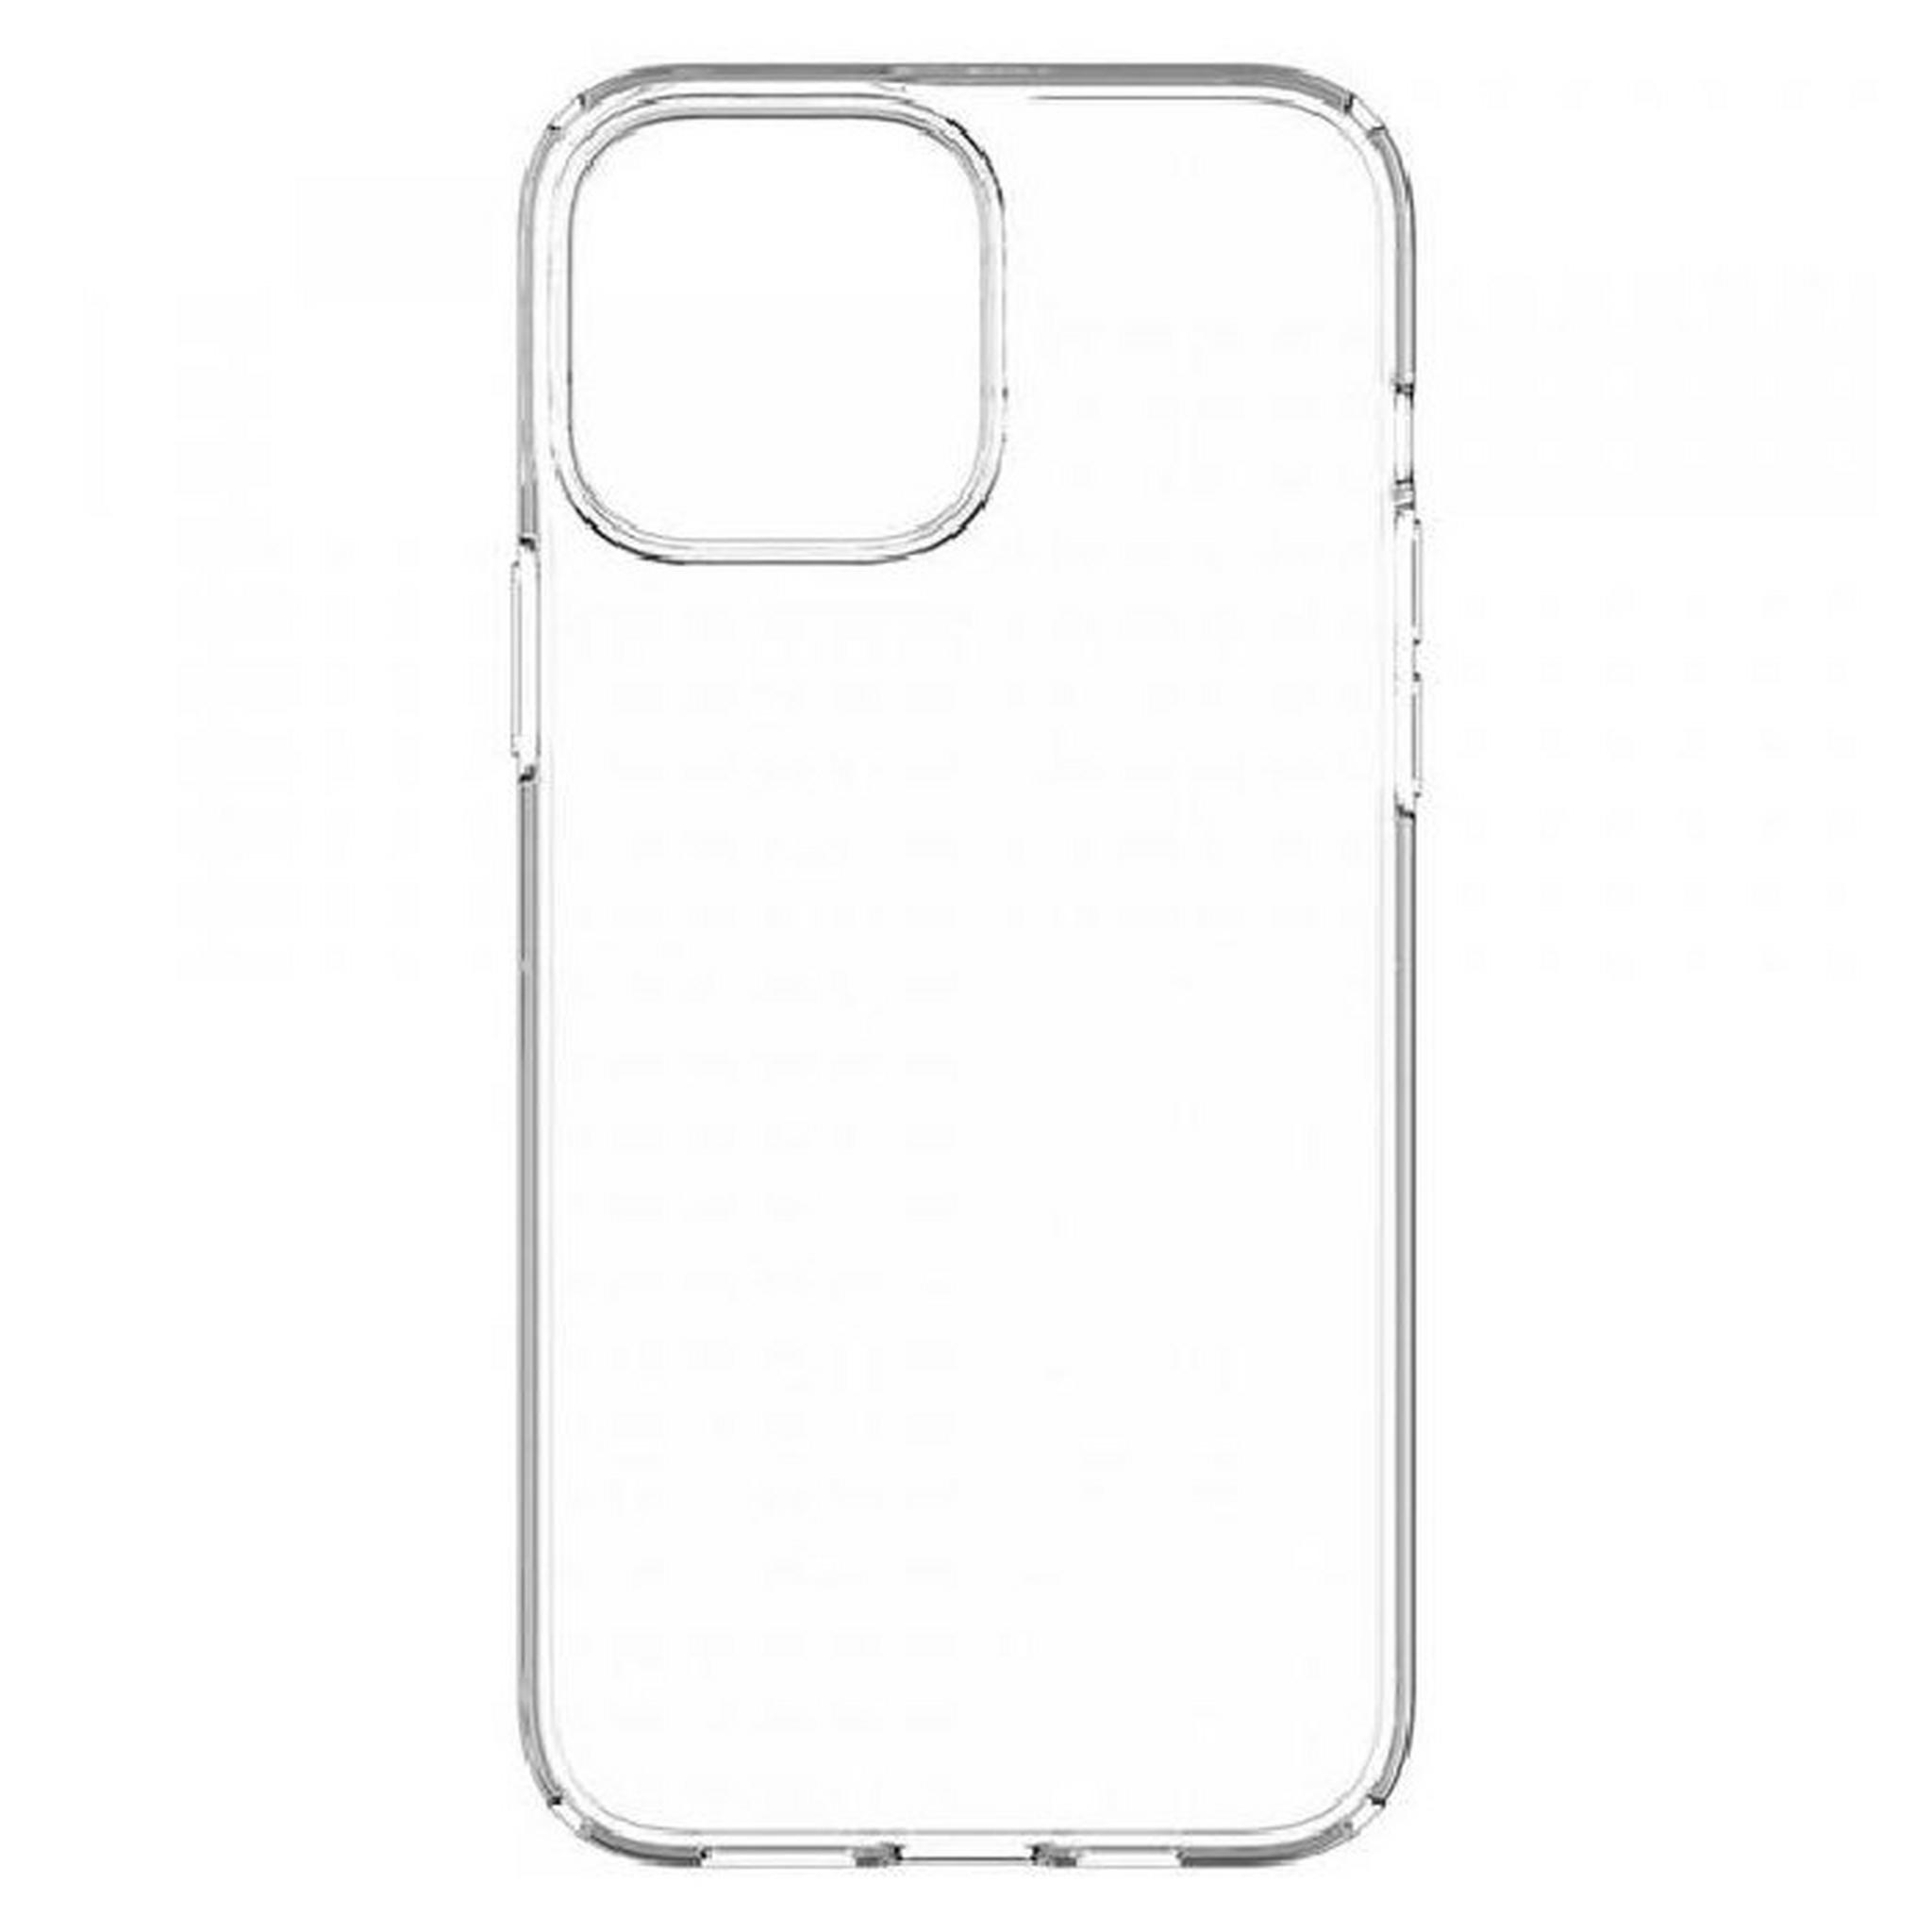 Spigen Crystal iPhone 13 Pro Max Case - Crystal Clear Price in KSA - Xcite